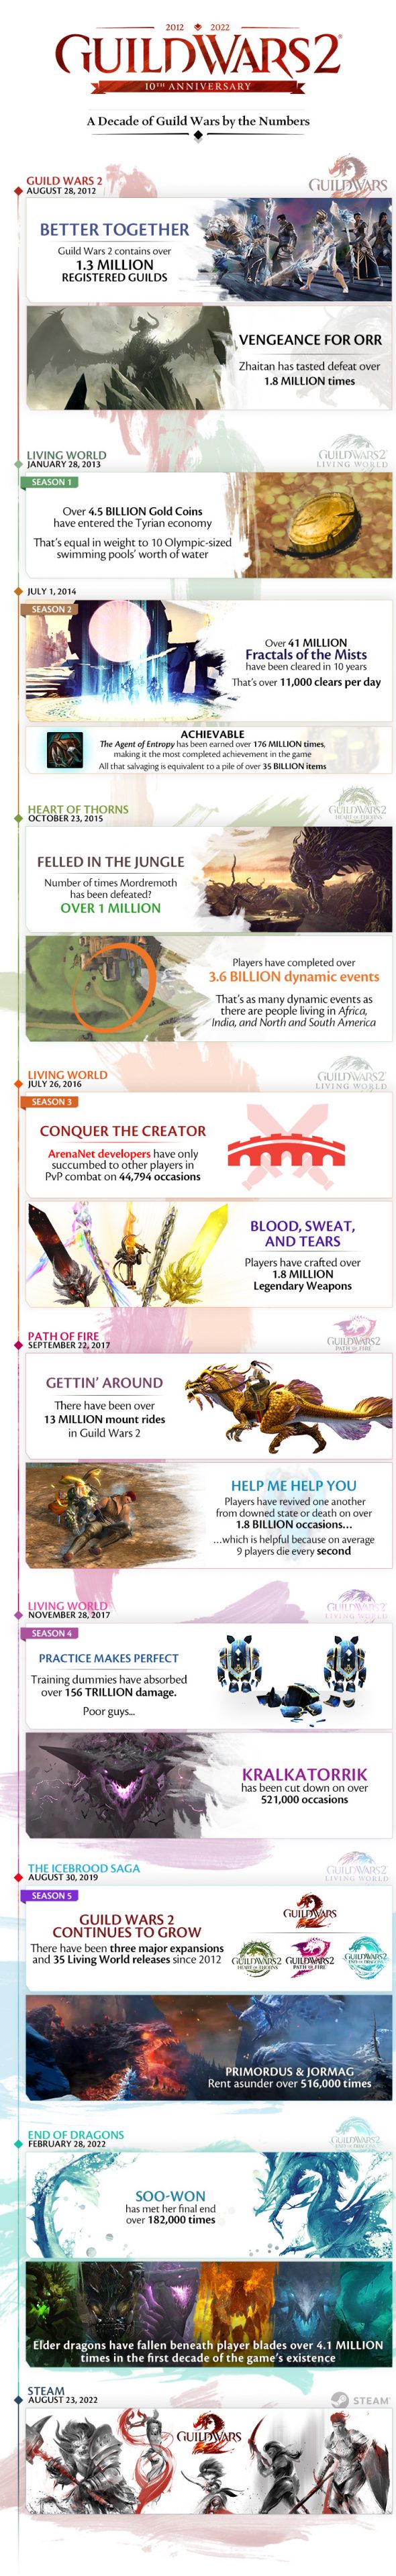 Guild Wars 2 10 Year Infographic